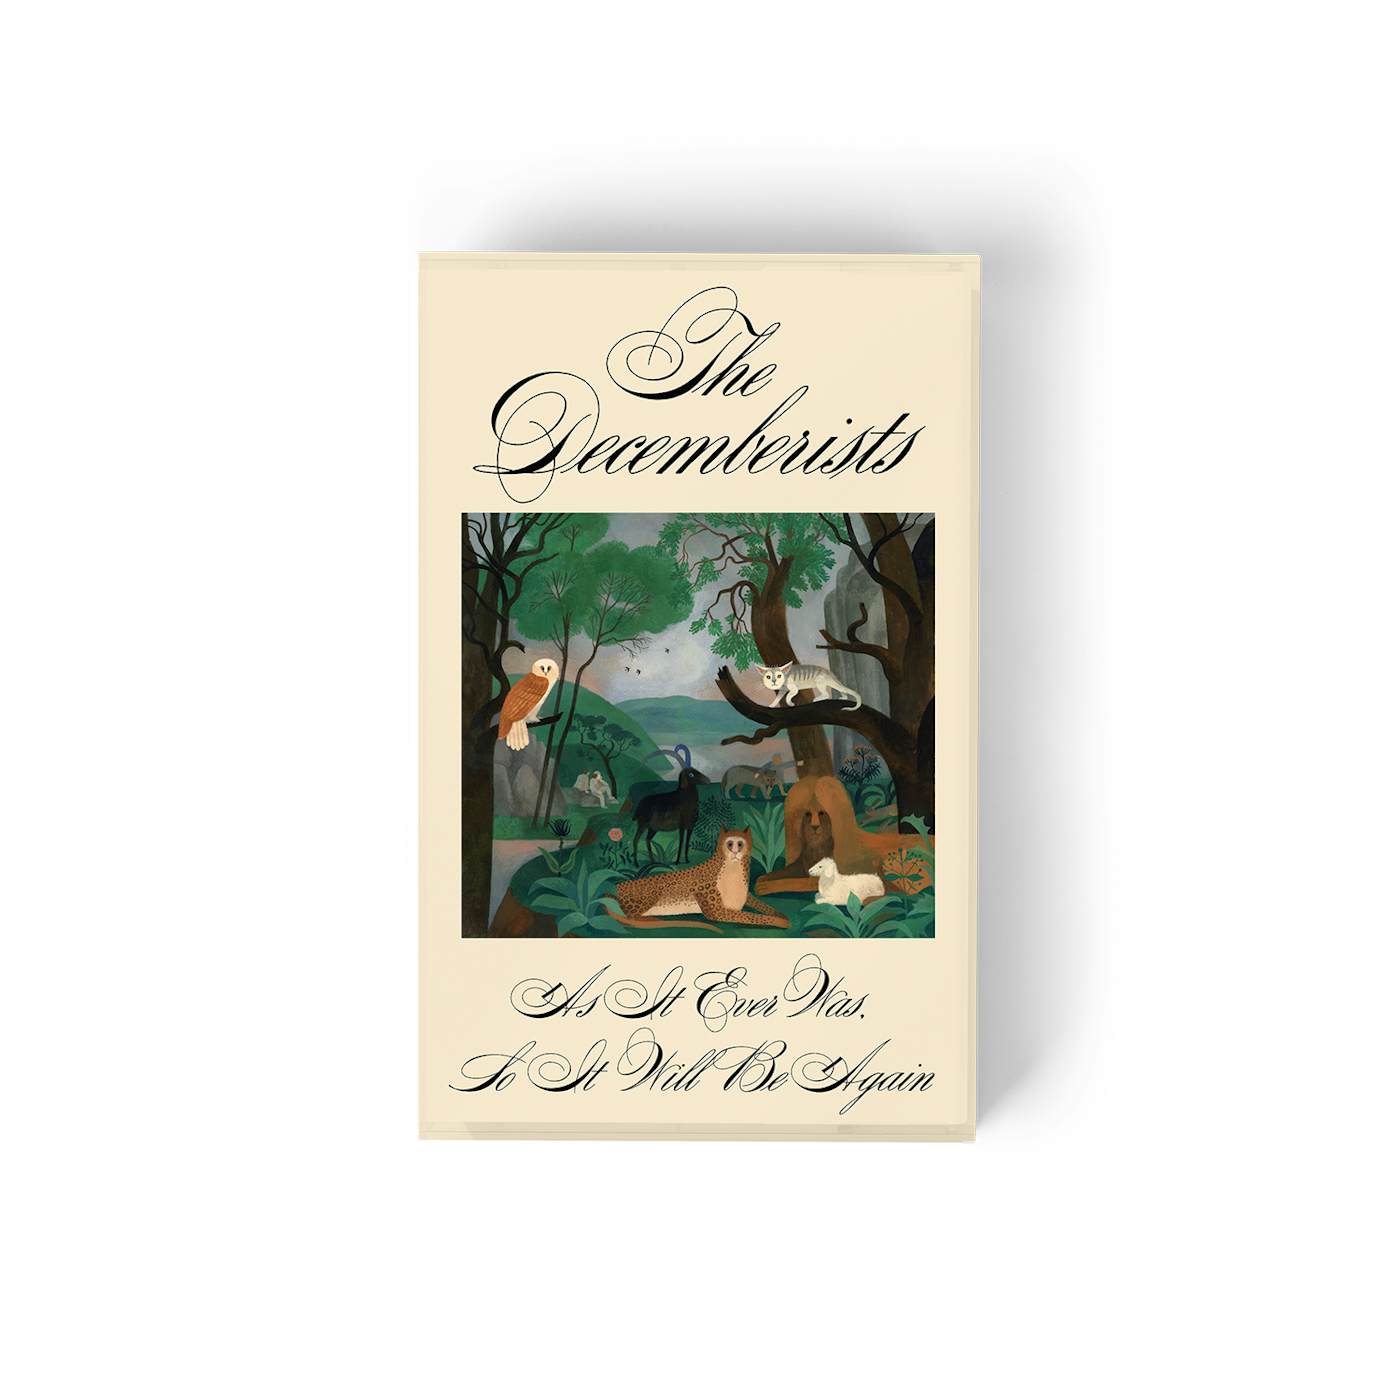 The Decemberists As It Ever Was, So It Will Be Again Cassette